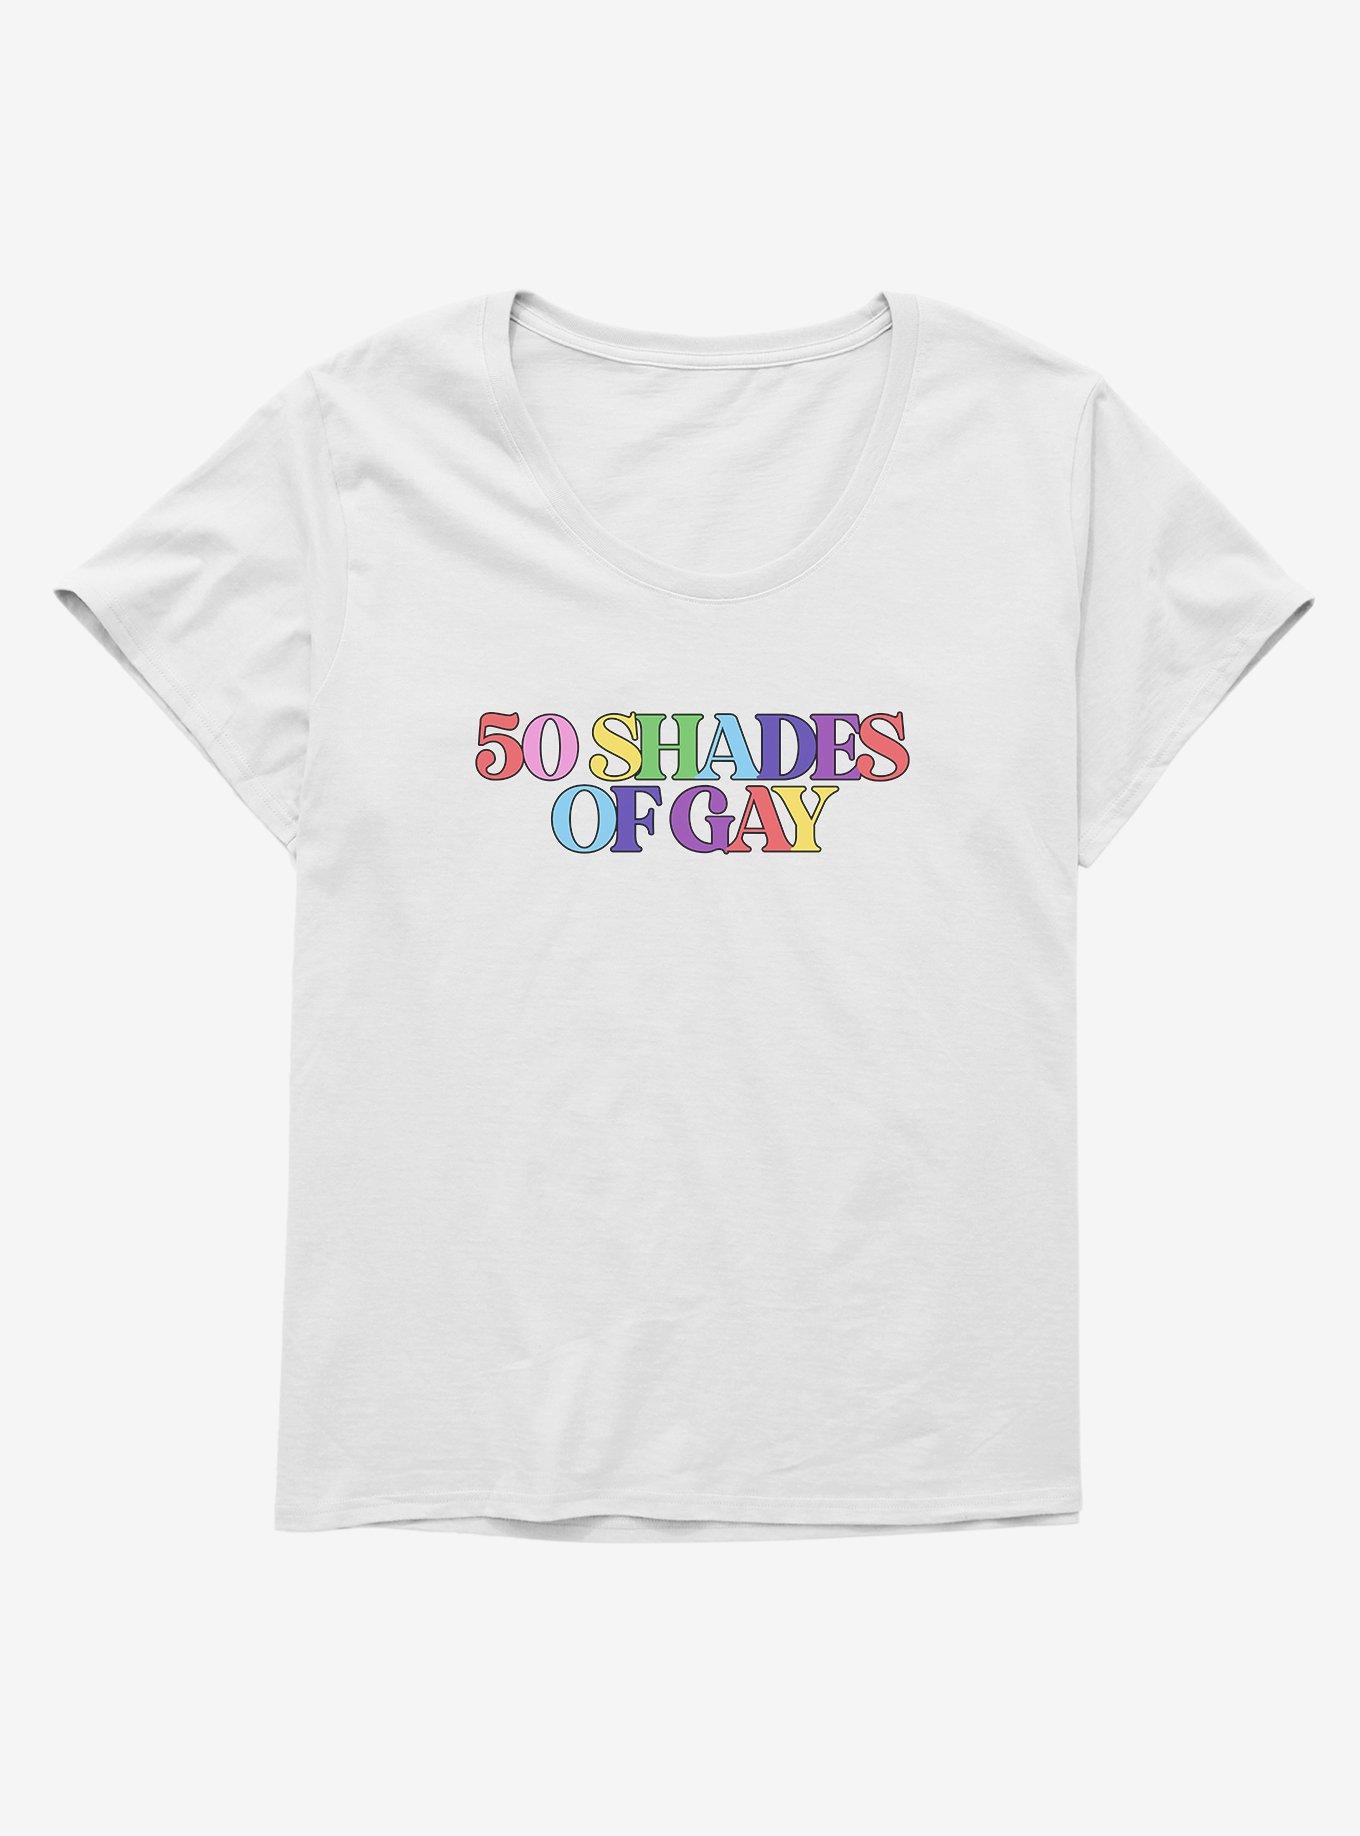 50 Shades Of Gay T-Shirt Plus Size, WHITE, hi-res